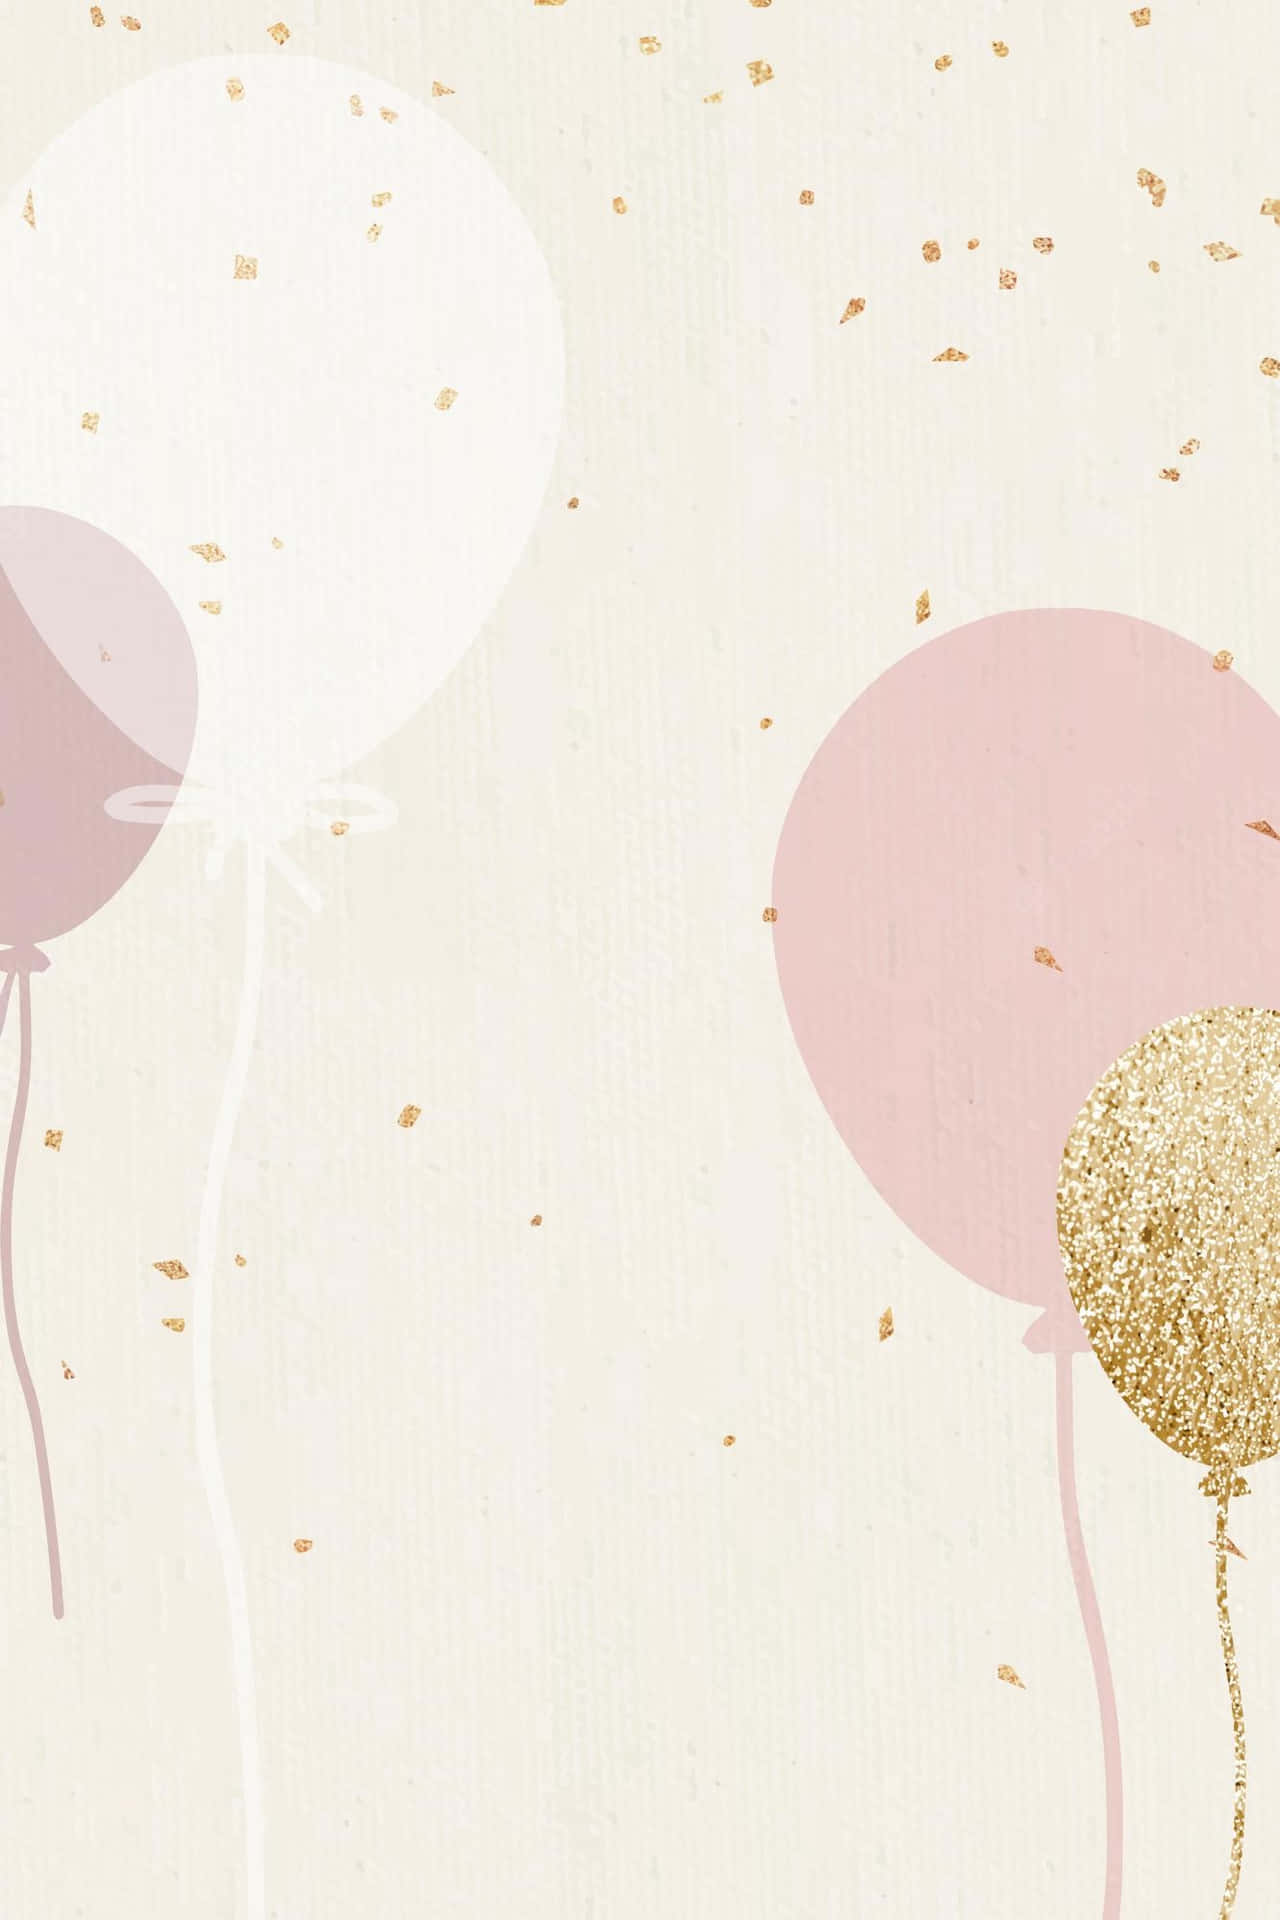 A Pink And Gold Balloons On A White Background Wallpaper